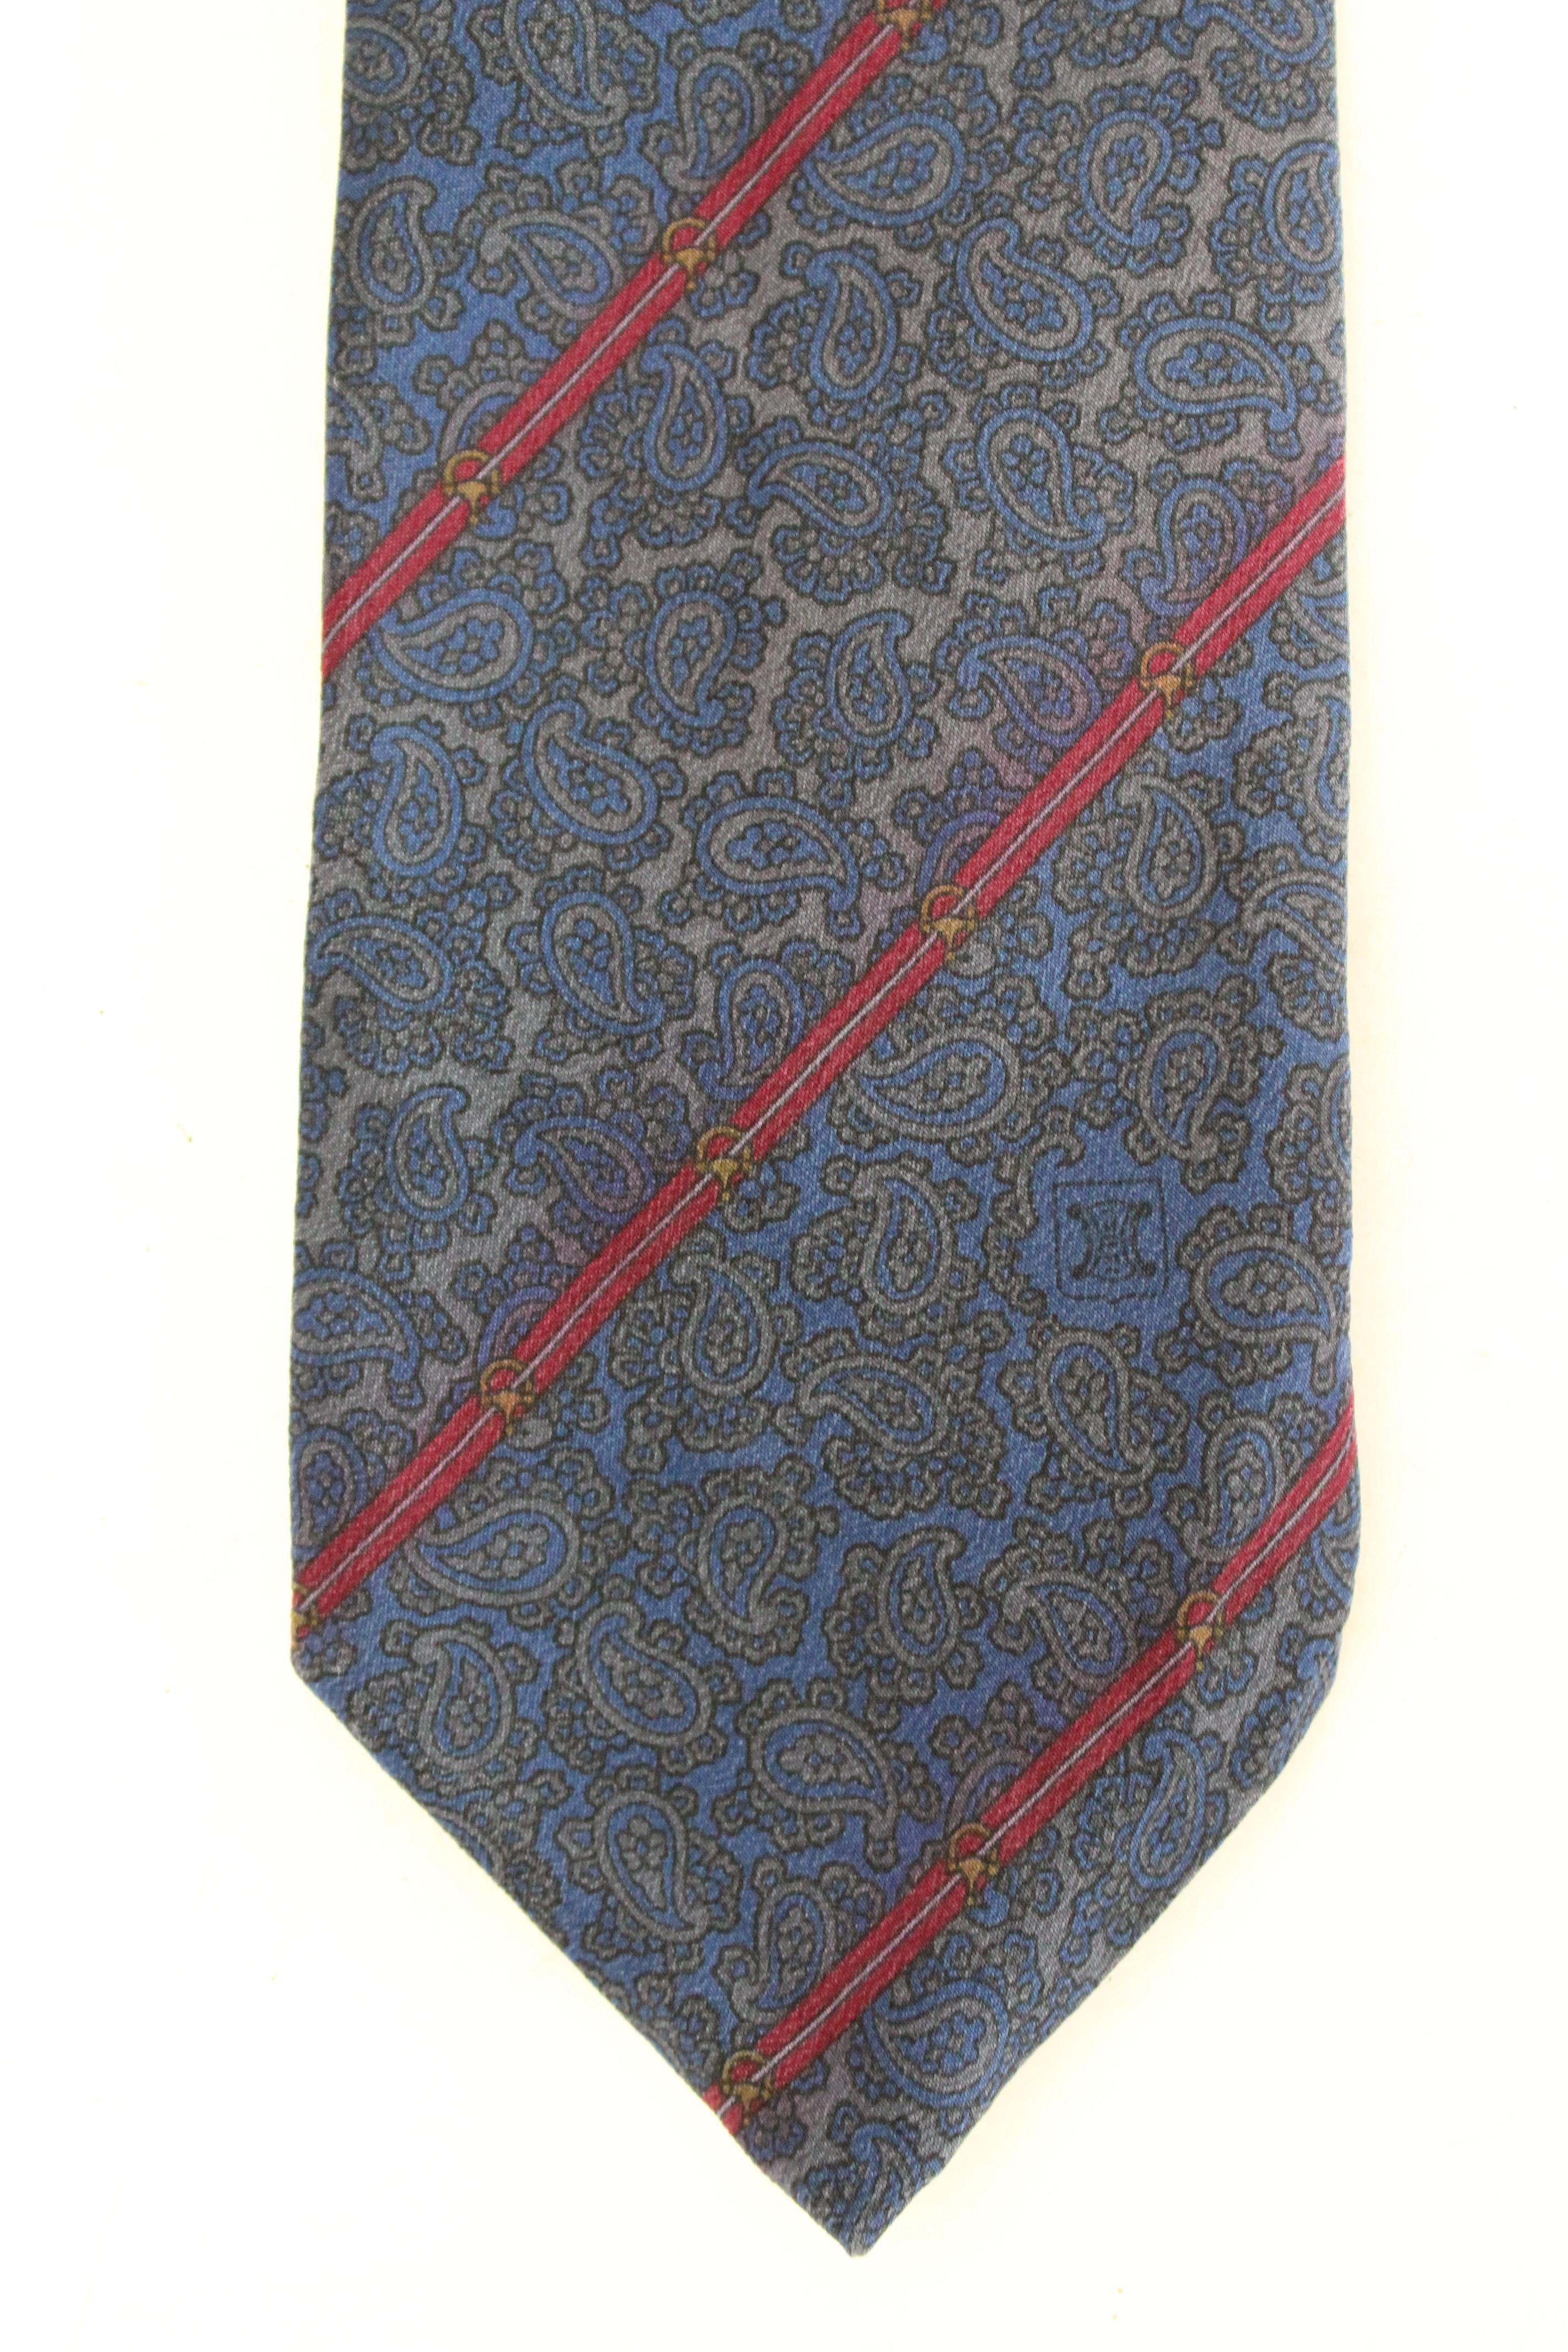 Celine vintage 90s tie. Regimental tie, blue and red with paisley pattern. 100% silk fabric. Made in Spain.

Condition: Excellent

Item used few times, it remains in its excellent condition. There are no visible signs of wear, and it is almost as